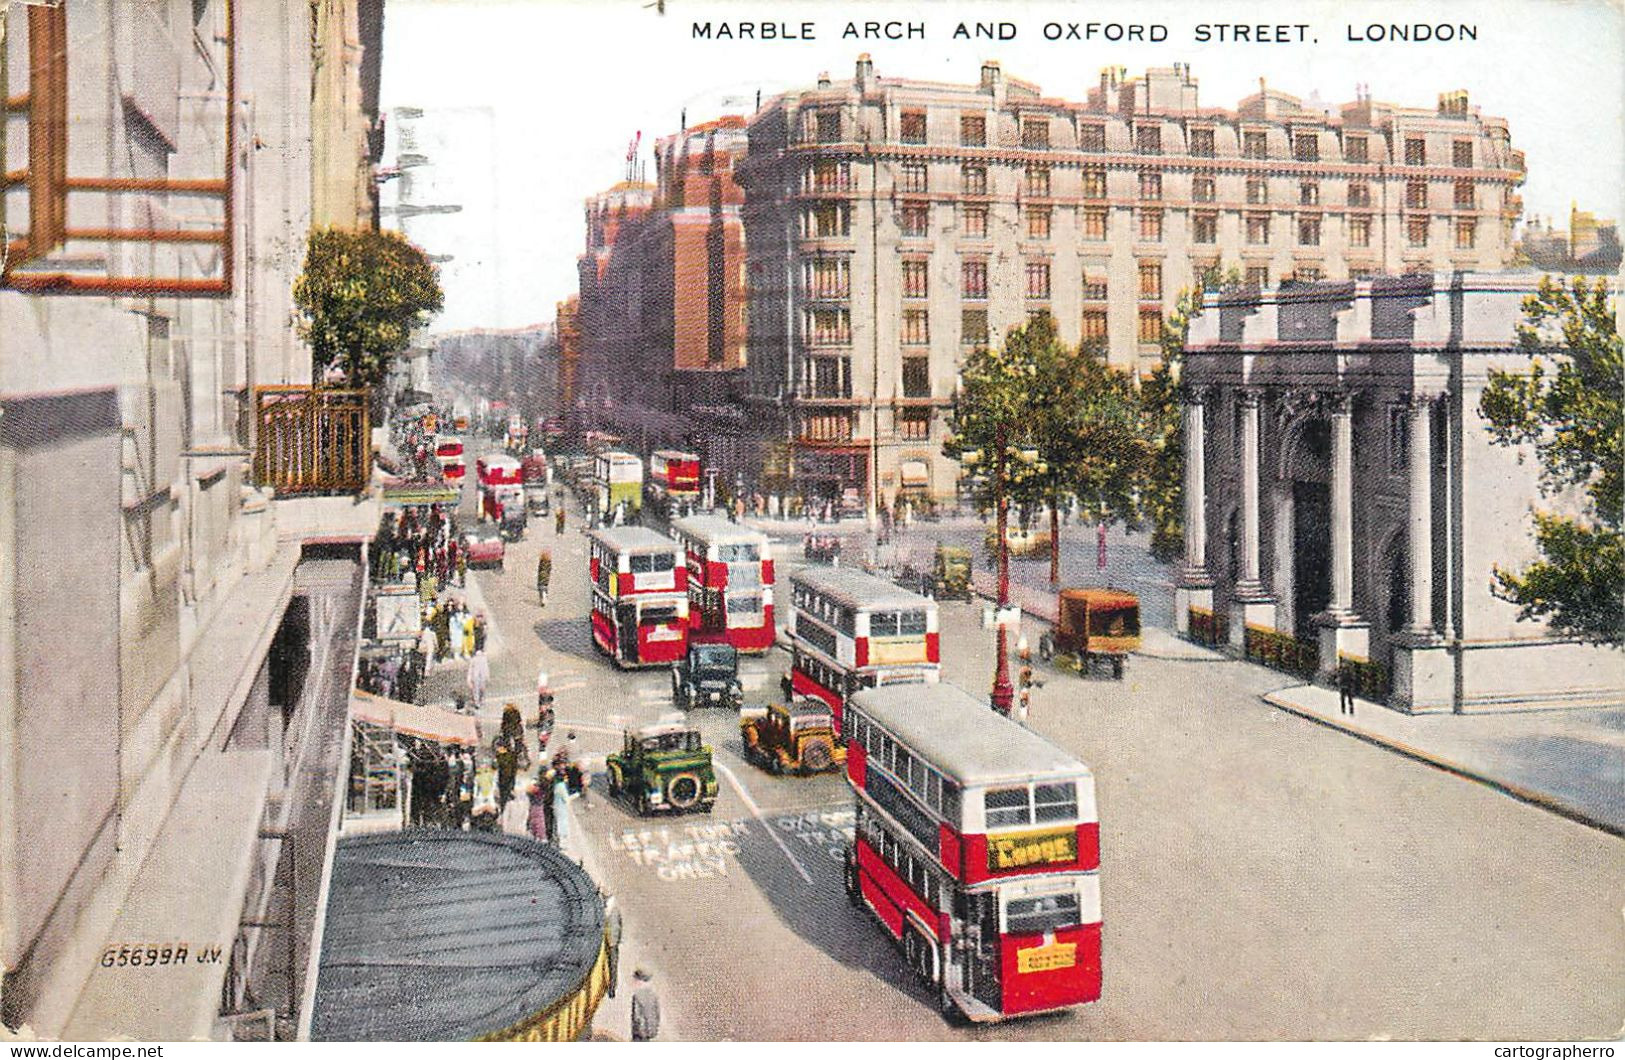 London Surface Traffic Automobiles Marble Arch And Oxford Street Bus - St. Paul's Cathedral